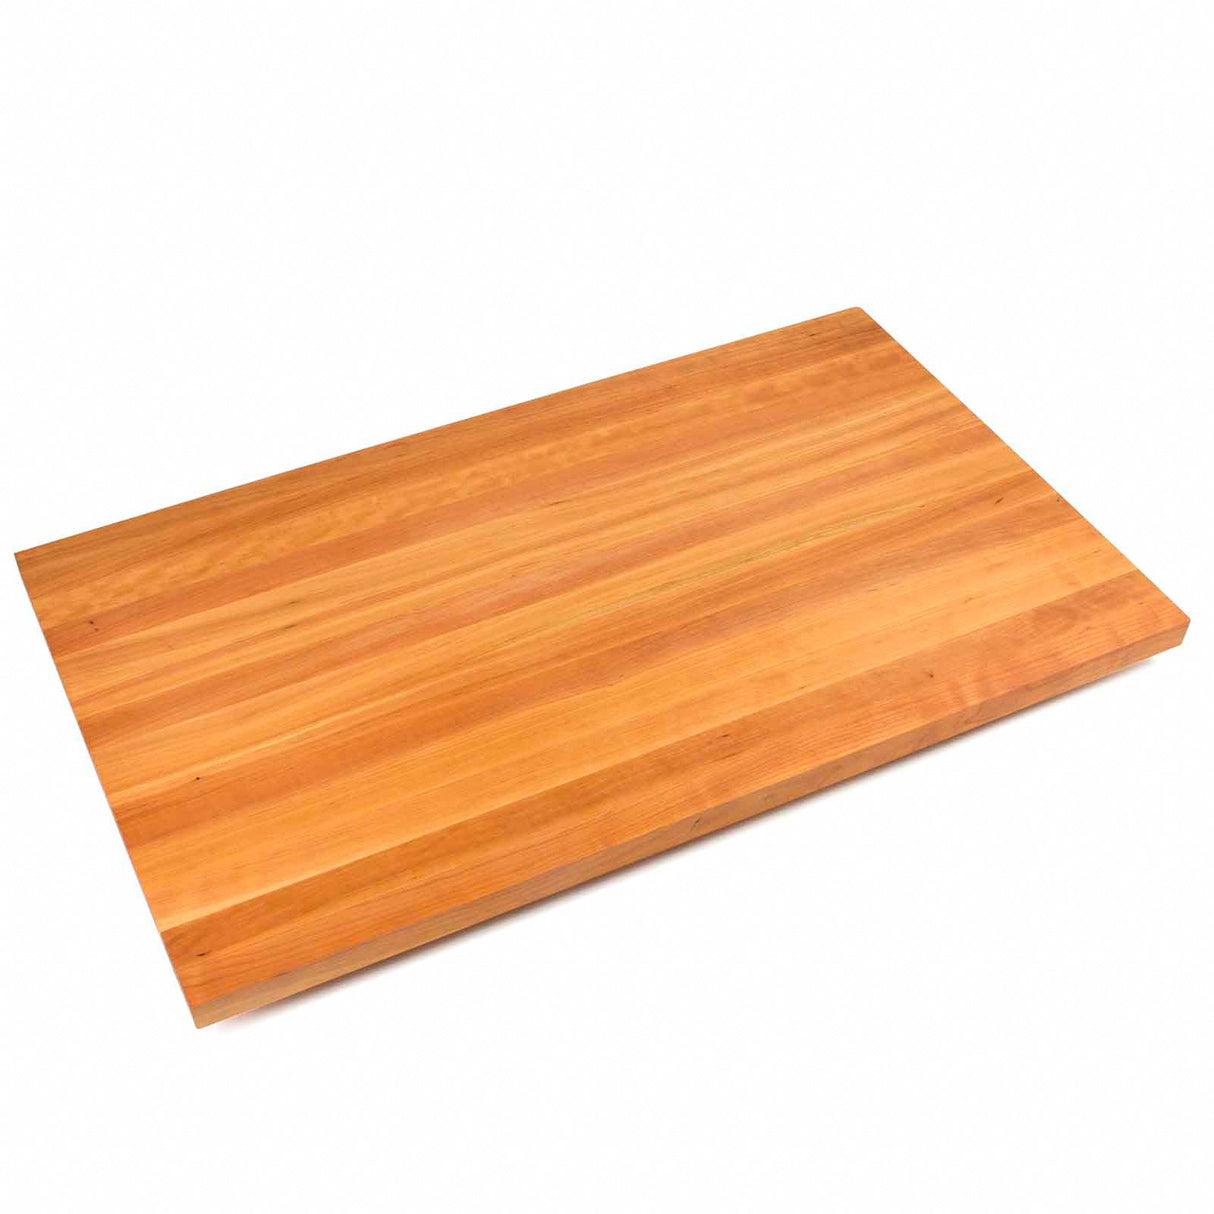 John Boos CHYKCT2-3630-O Cherry Kitchen Counter Top with Oil Finish, 2.25" Thickness, 36" x 30"